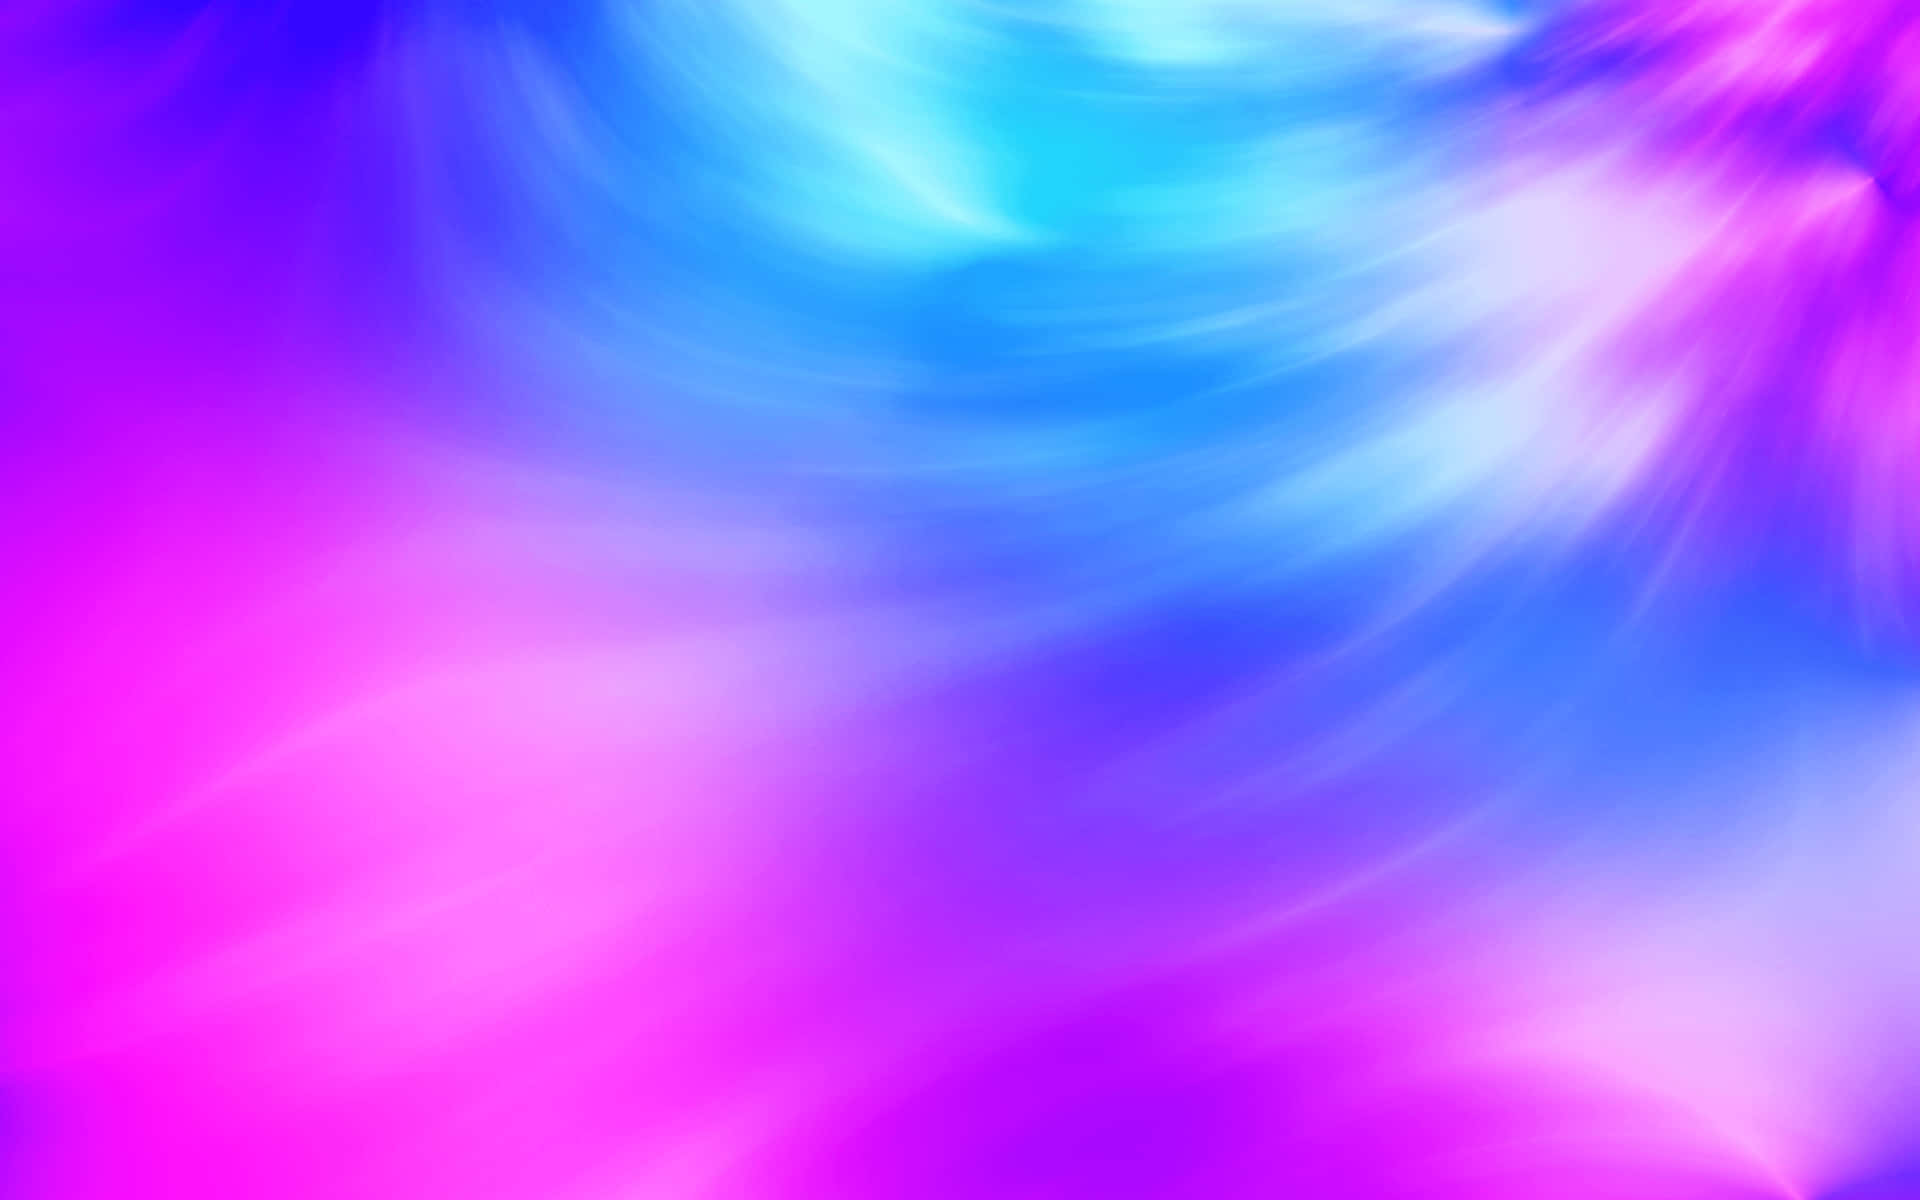 A dazzlingly vibrant pink and blue background that brings energy and life to any space